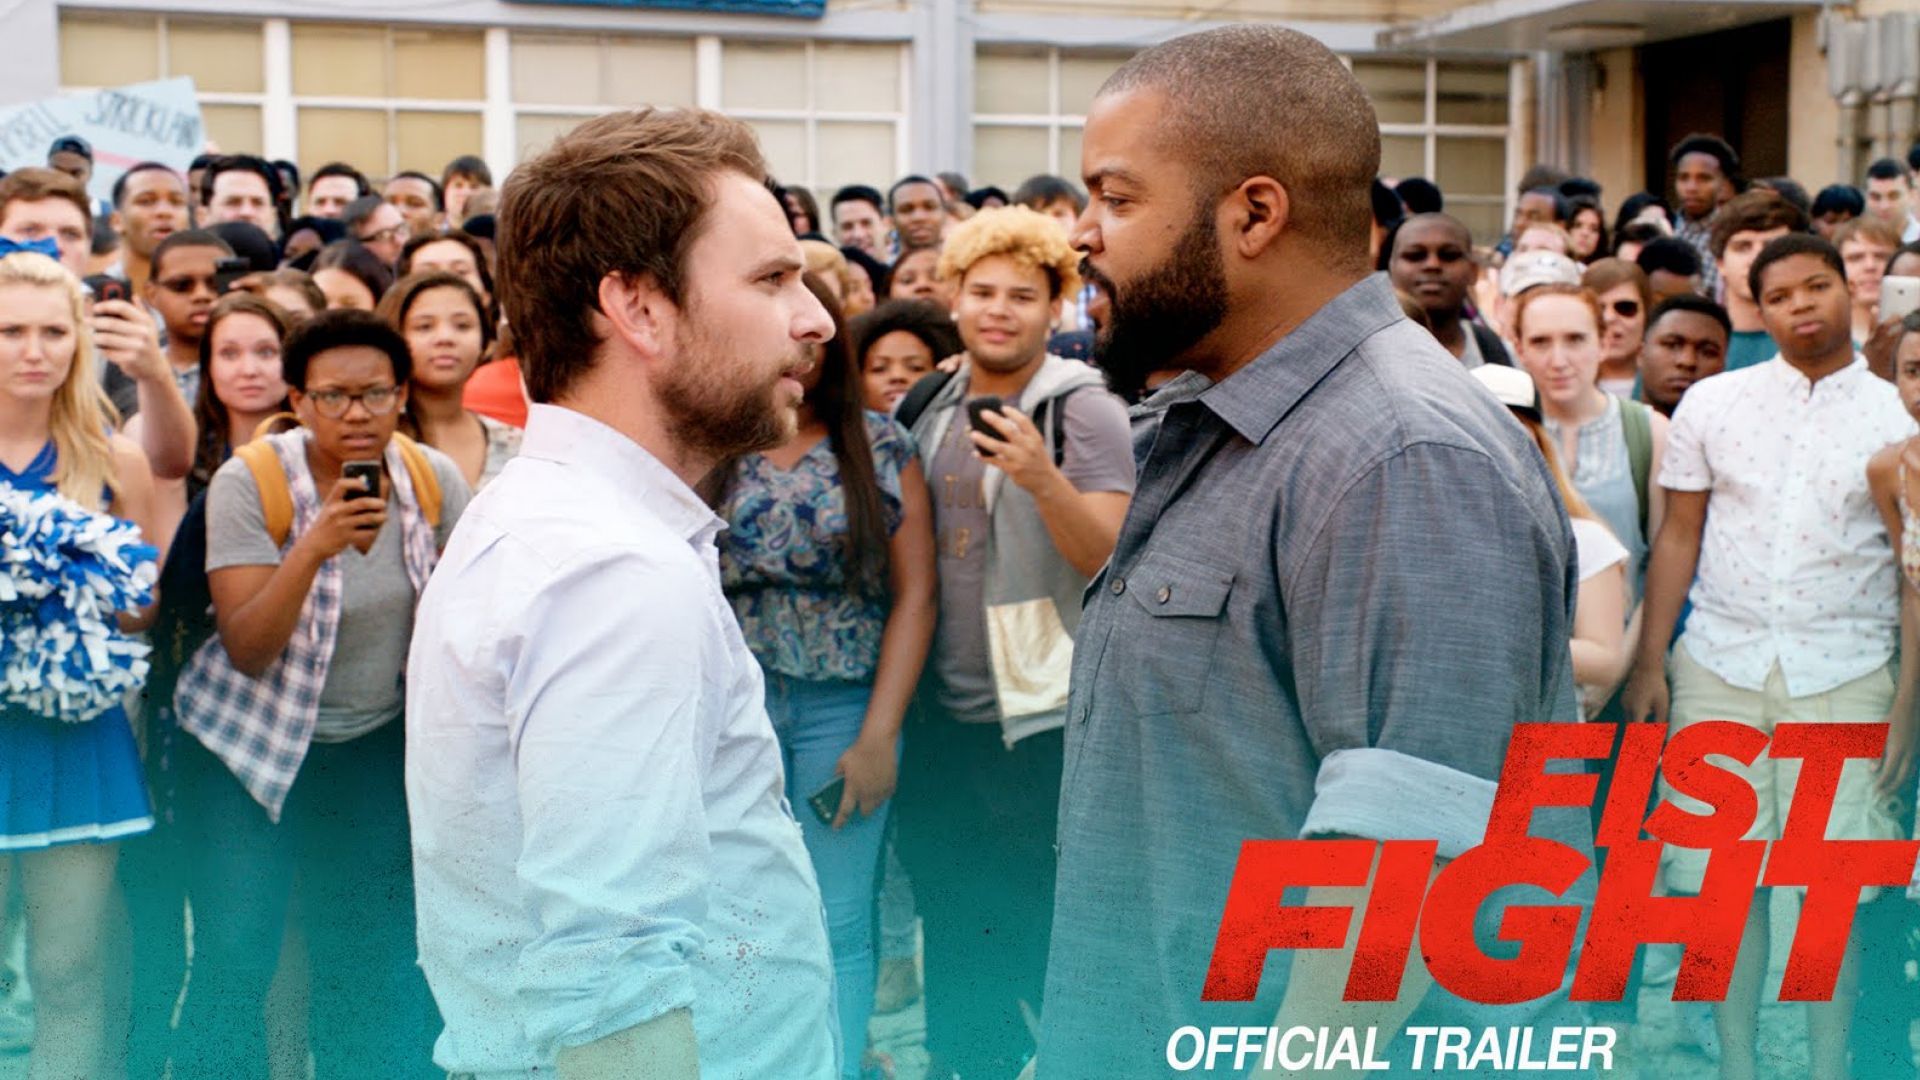 Fist Fight trailer starring Ice Cube and Charlie Day